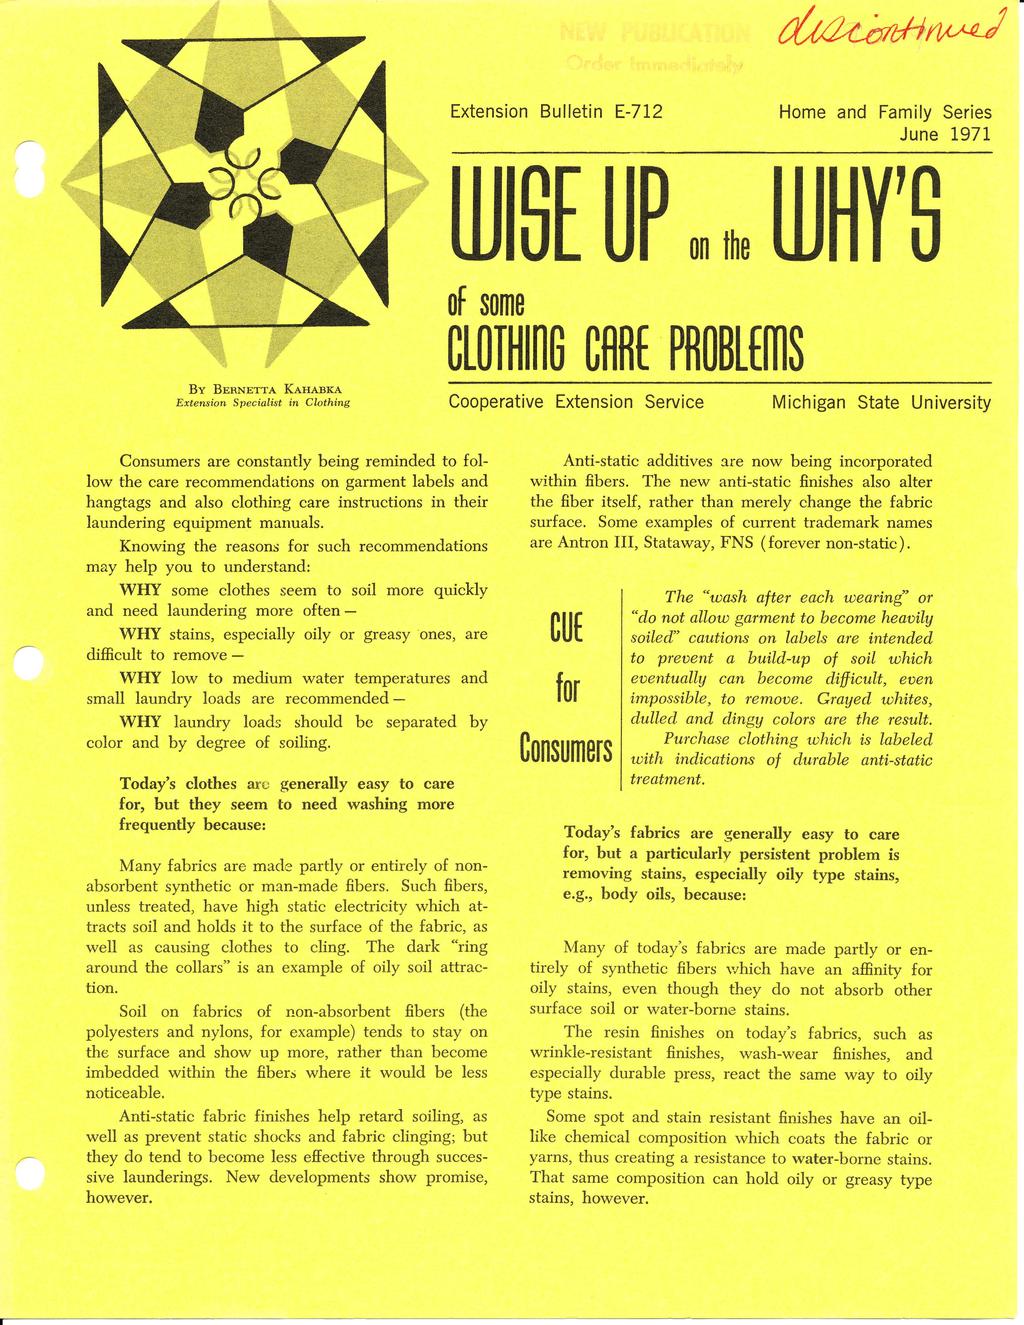 Extension Bulletin E-712 WSE UP Home and Family Series June 1971 on the WHY'S of some CLOTHinG CARE PROBLEmS By BERNETTA KAHABKA Extension Specialist in Clothing Cooperative Extension Service are